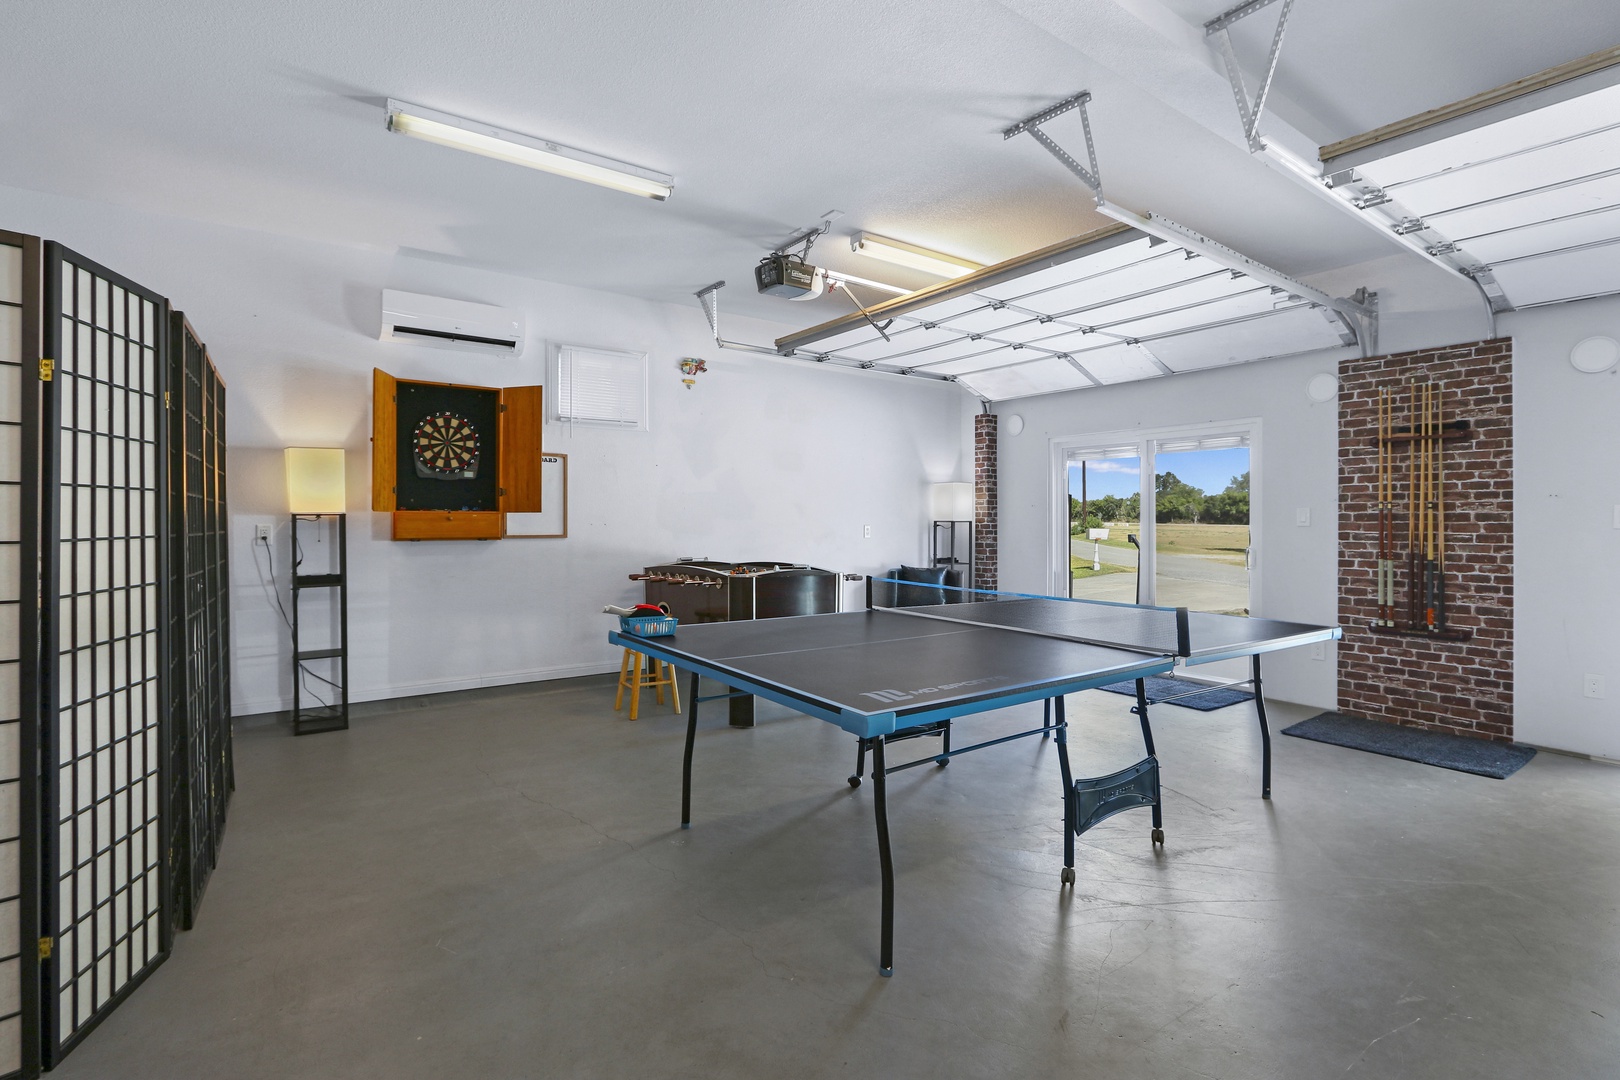 Get competitive with darts, foosball, pool, and ping pong in the game room